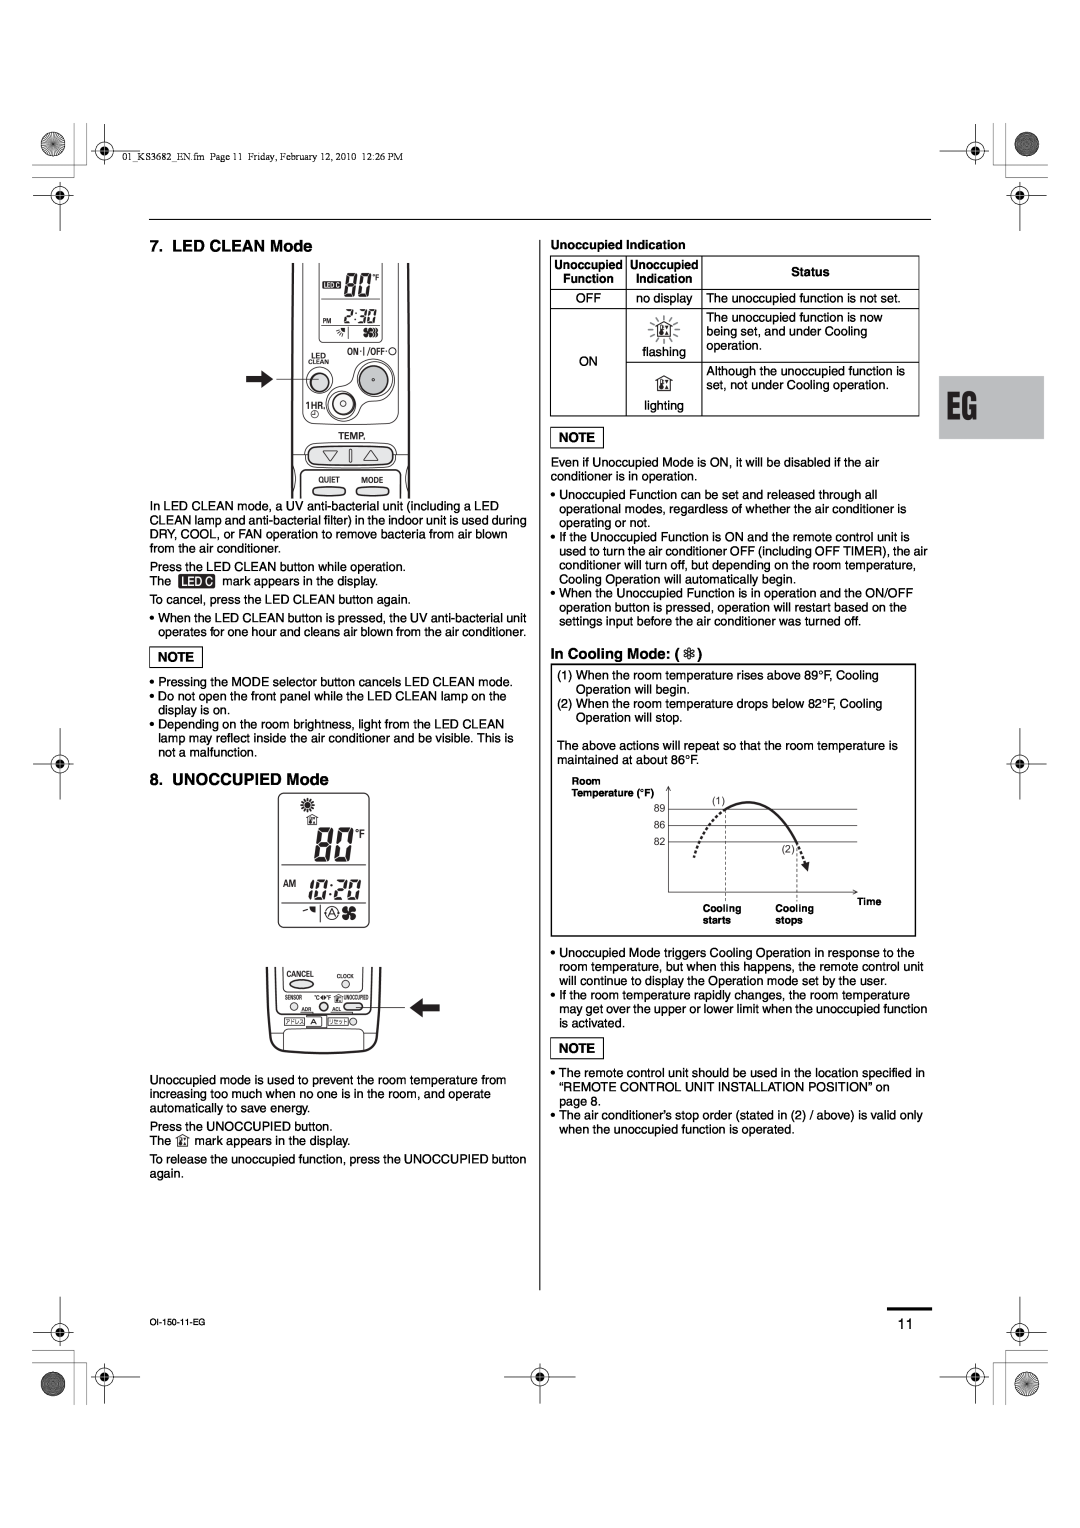 Sanyo KS3082, KS3682 instruction manual LED CLEAN Mode, UNOCCUPIED Mode, In Cooling Mode 